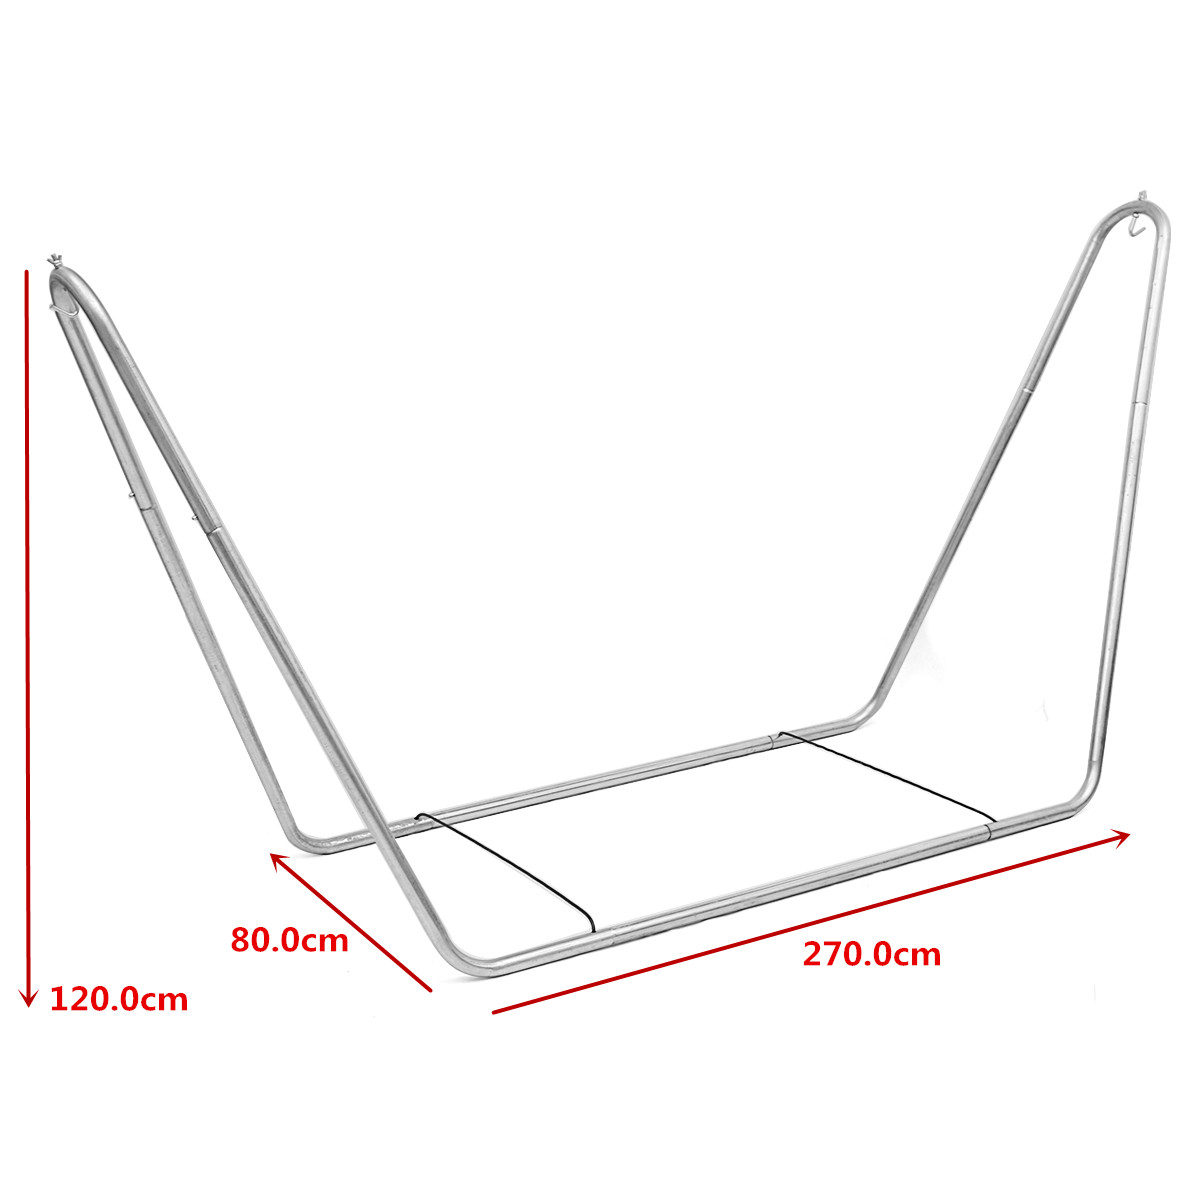 Garden Hammock Chair Stand Portable Travel Camping Hanging Hammock Swing Chair Metal Frame Stand Only for Camping furniture